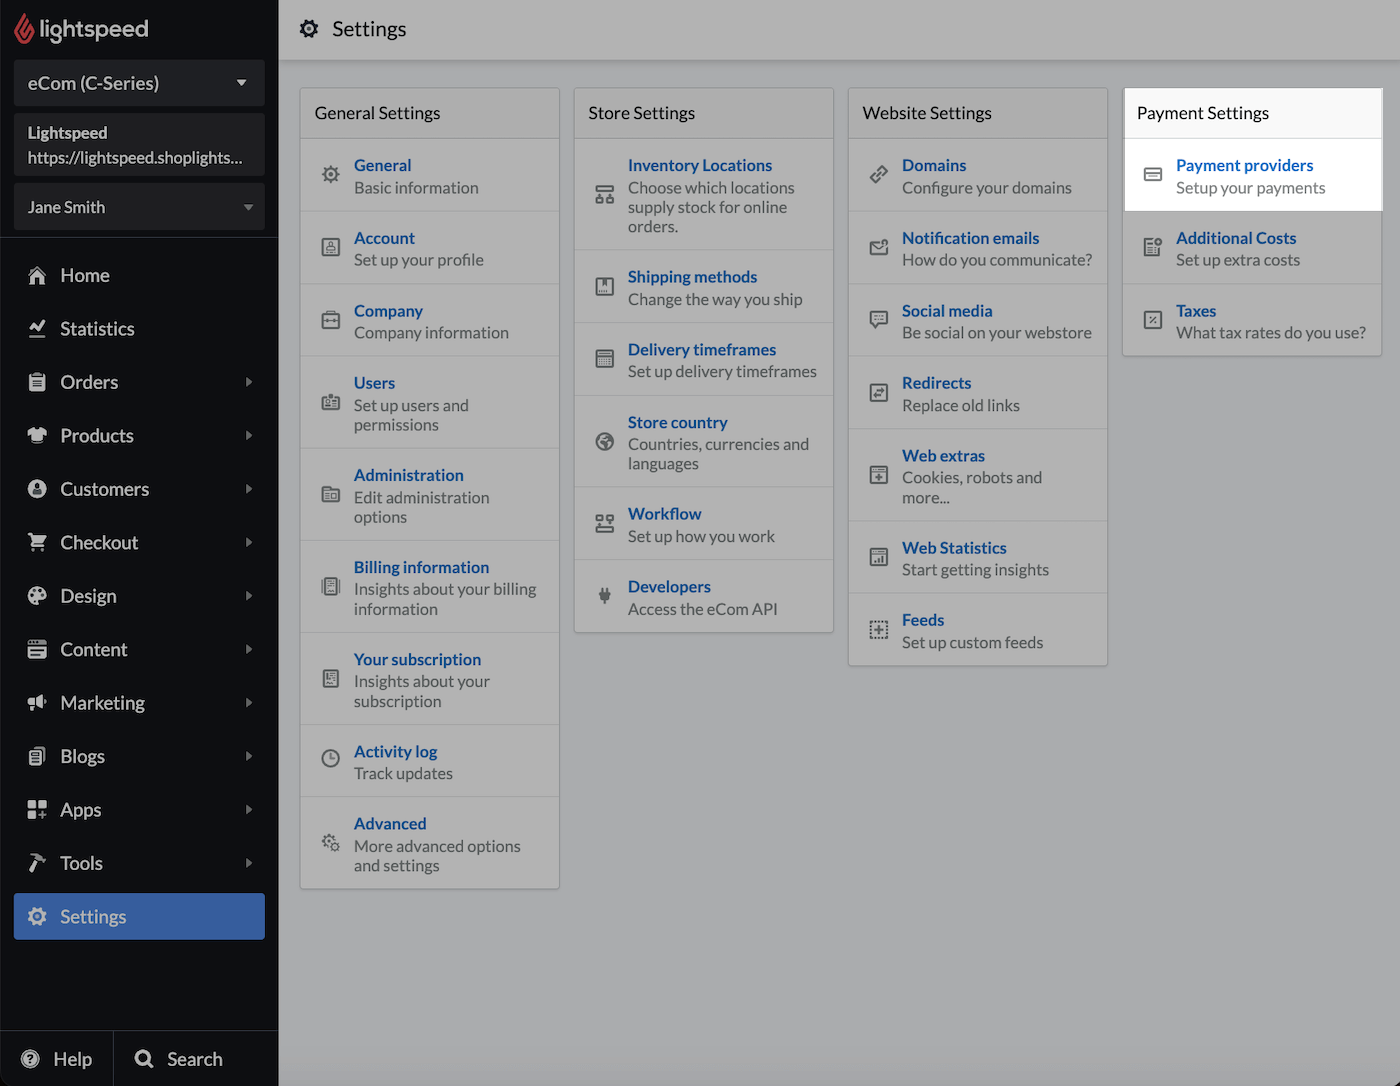 Settings page